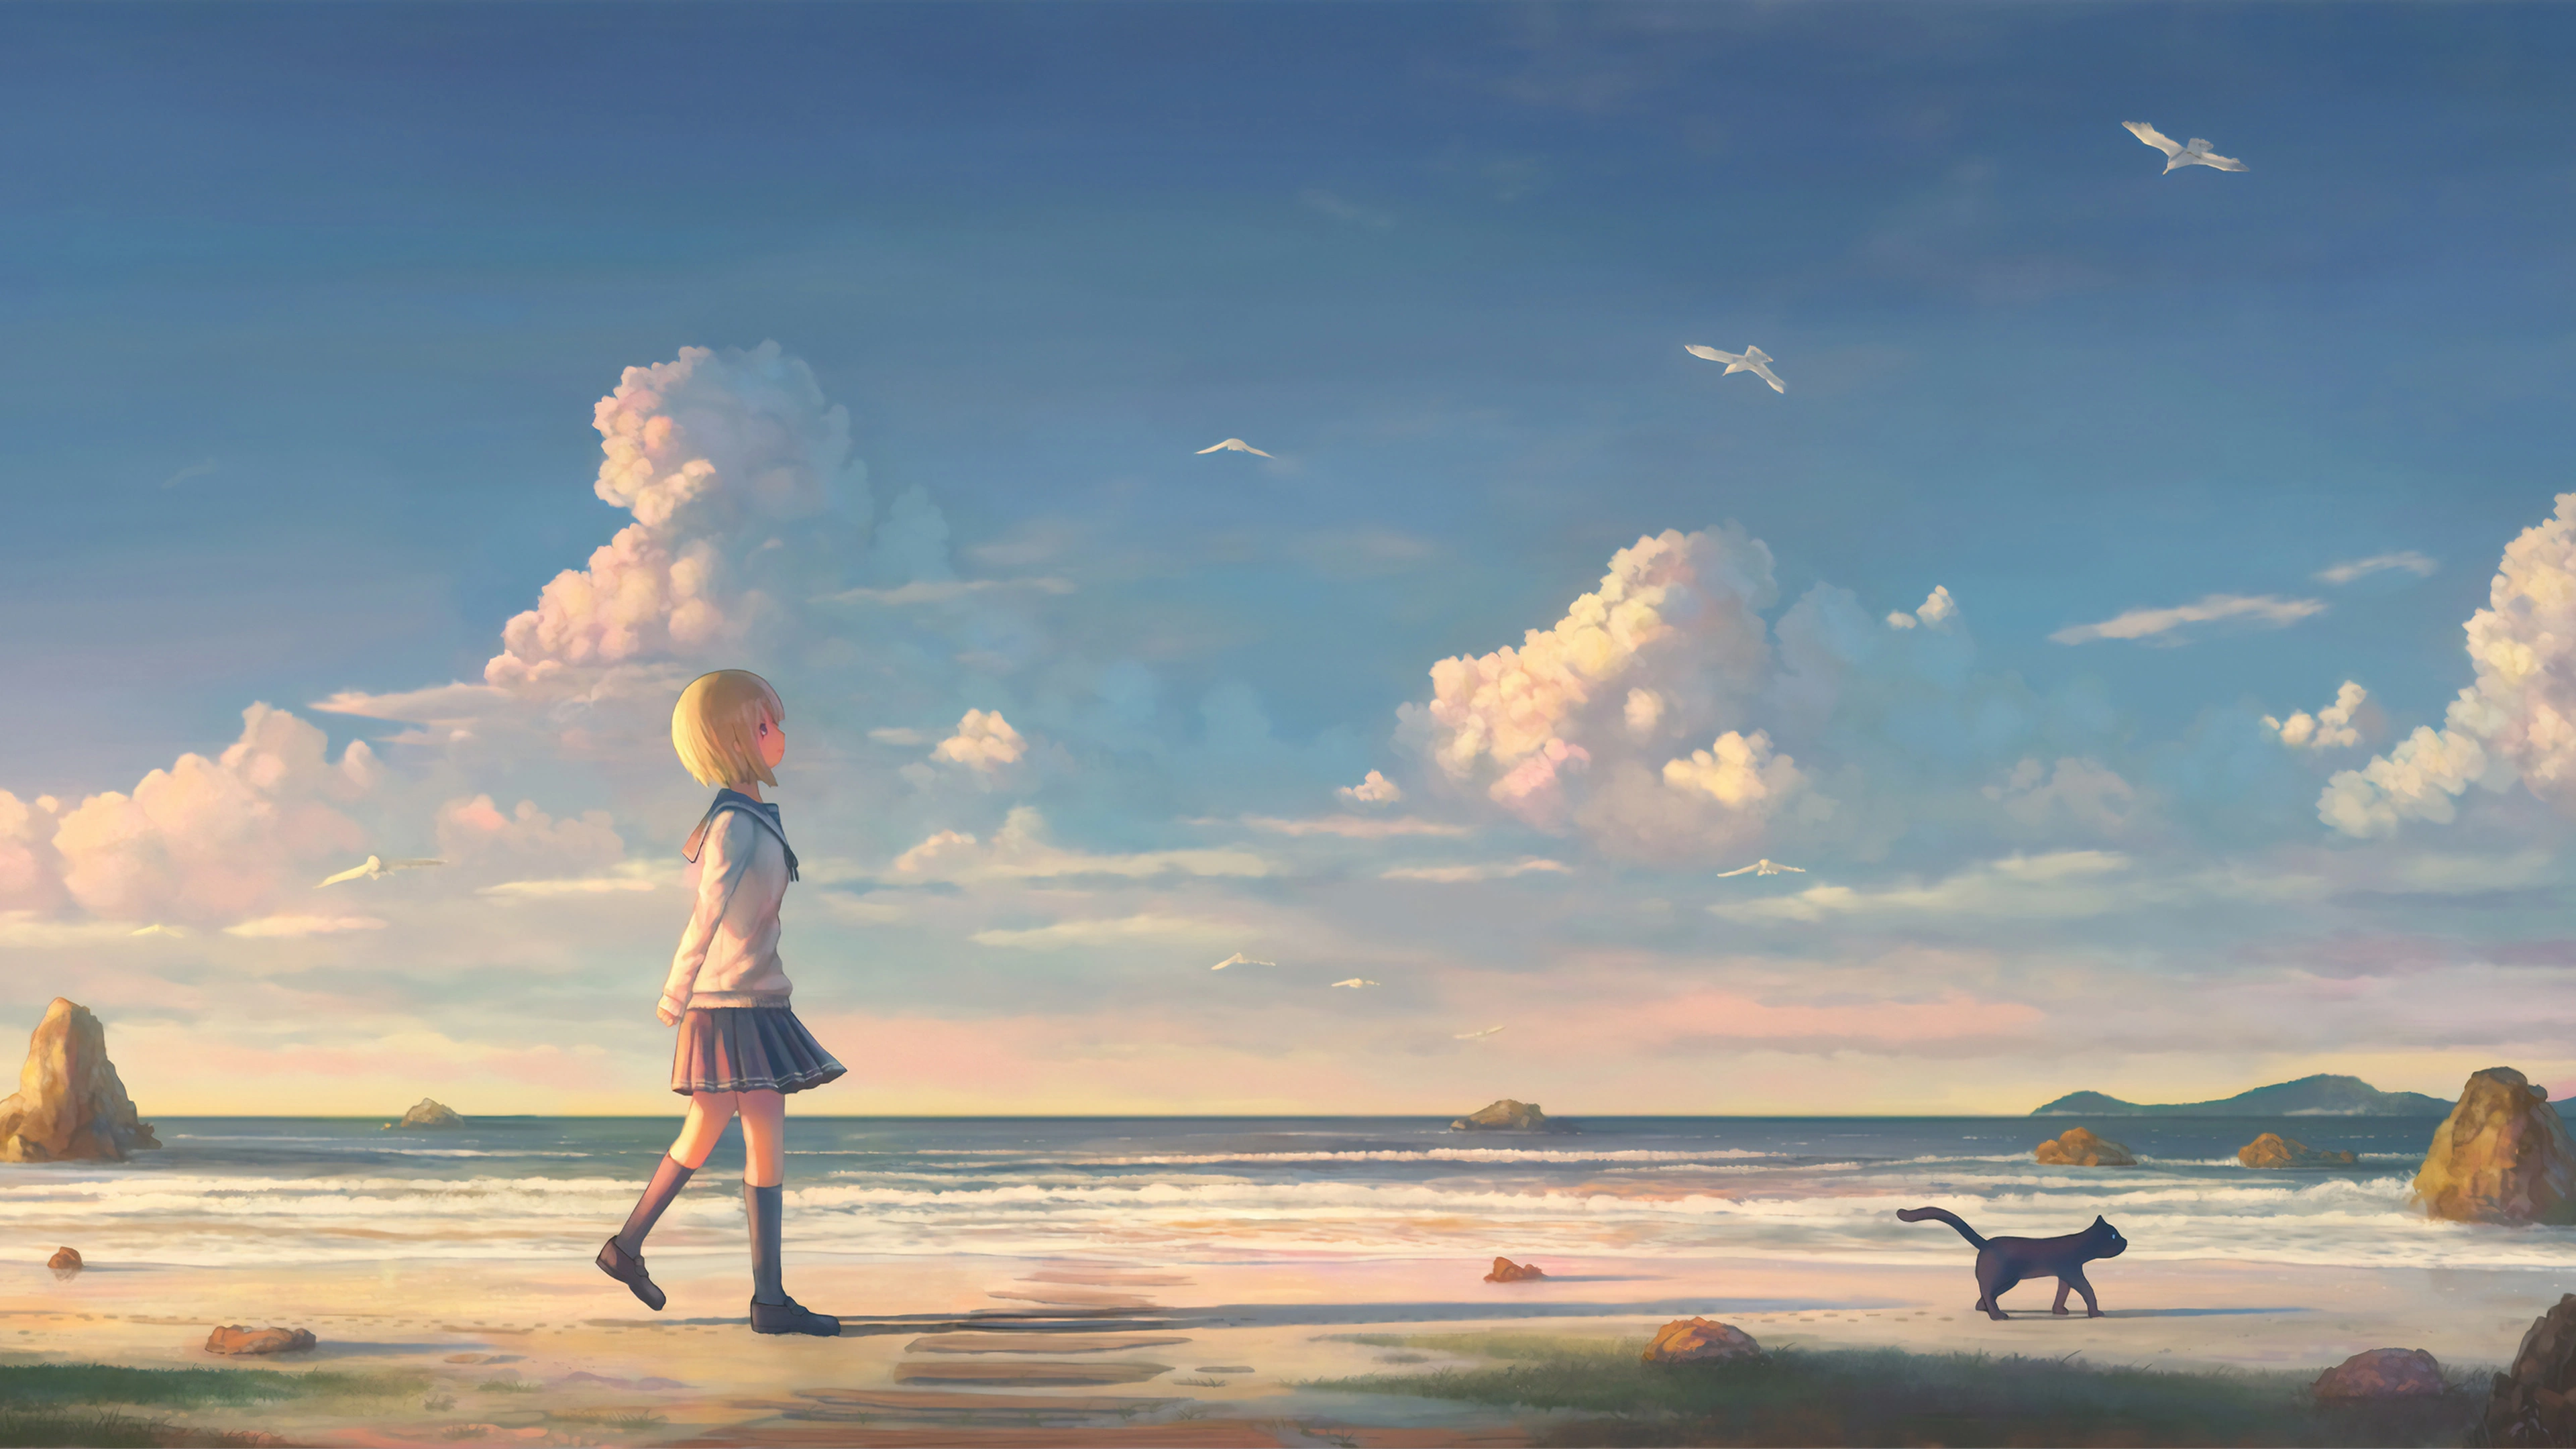 Bewitching Anime Scenery - Vibrant Summer Beach by Hachim202 on DeviantArt